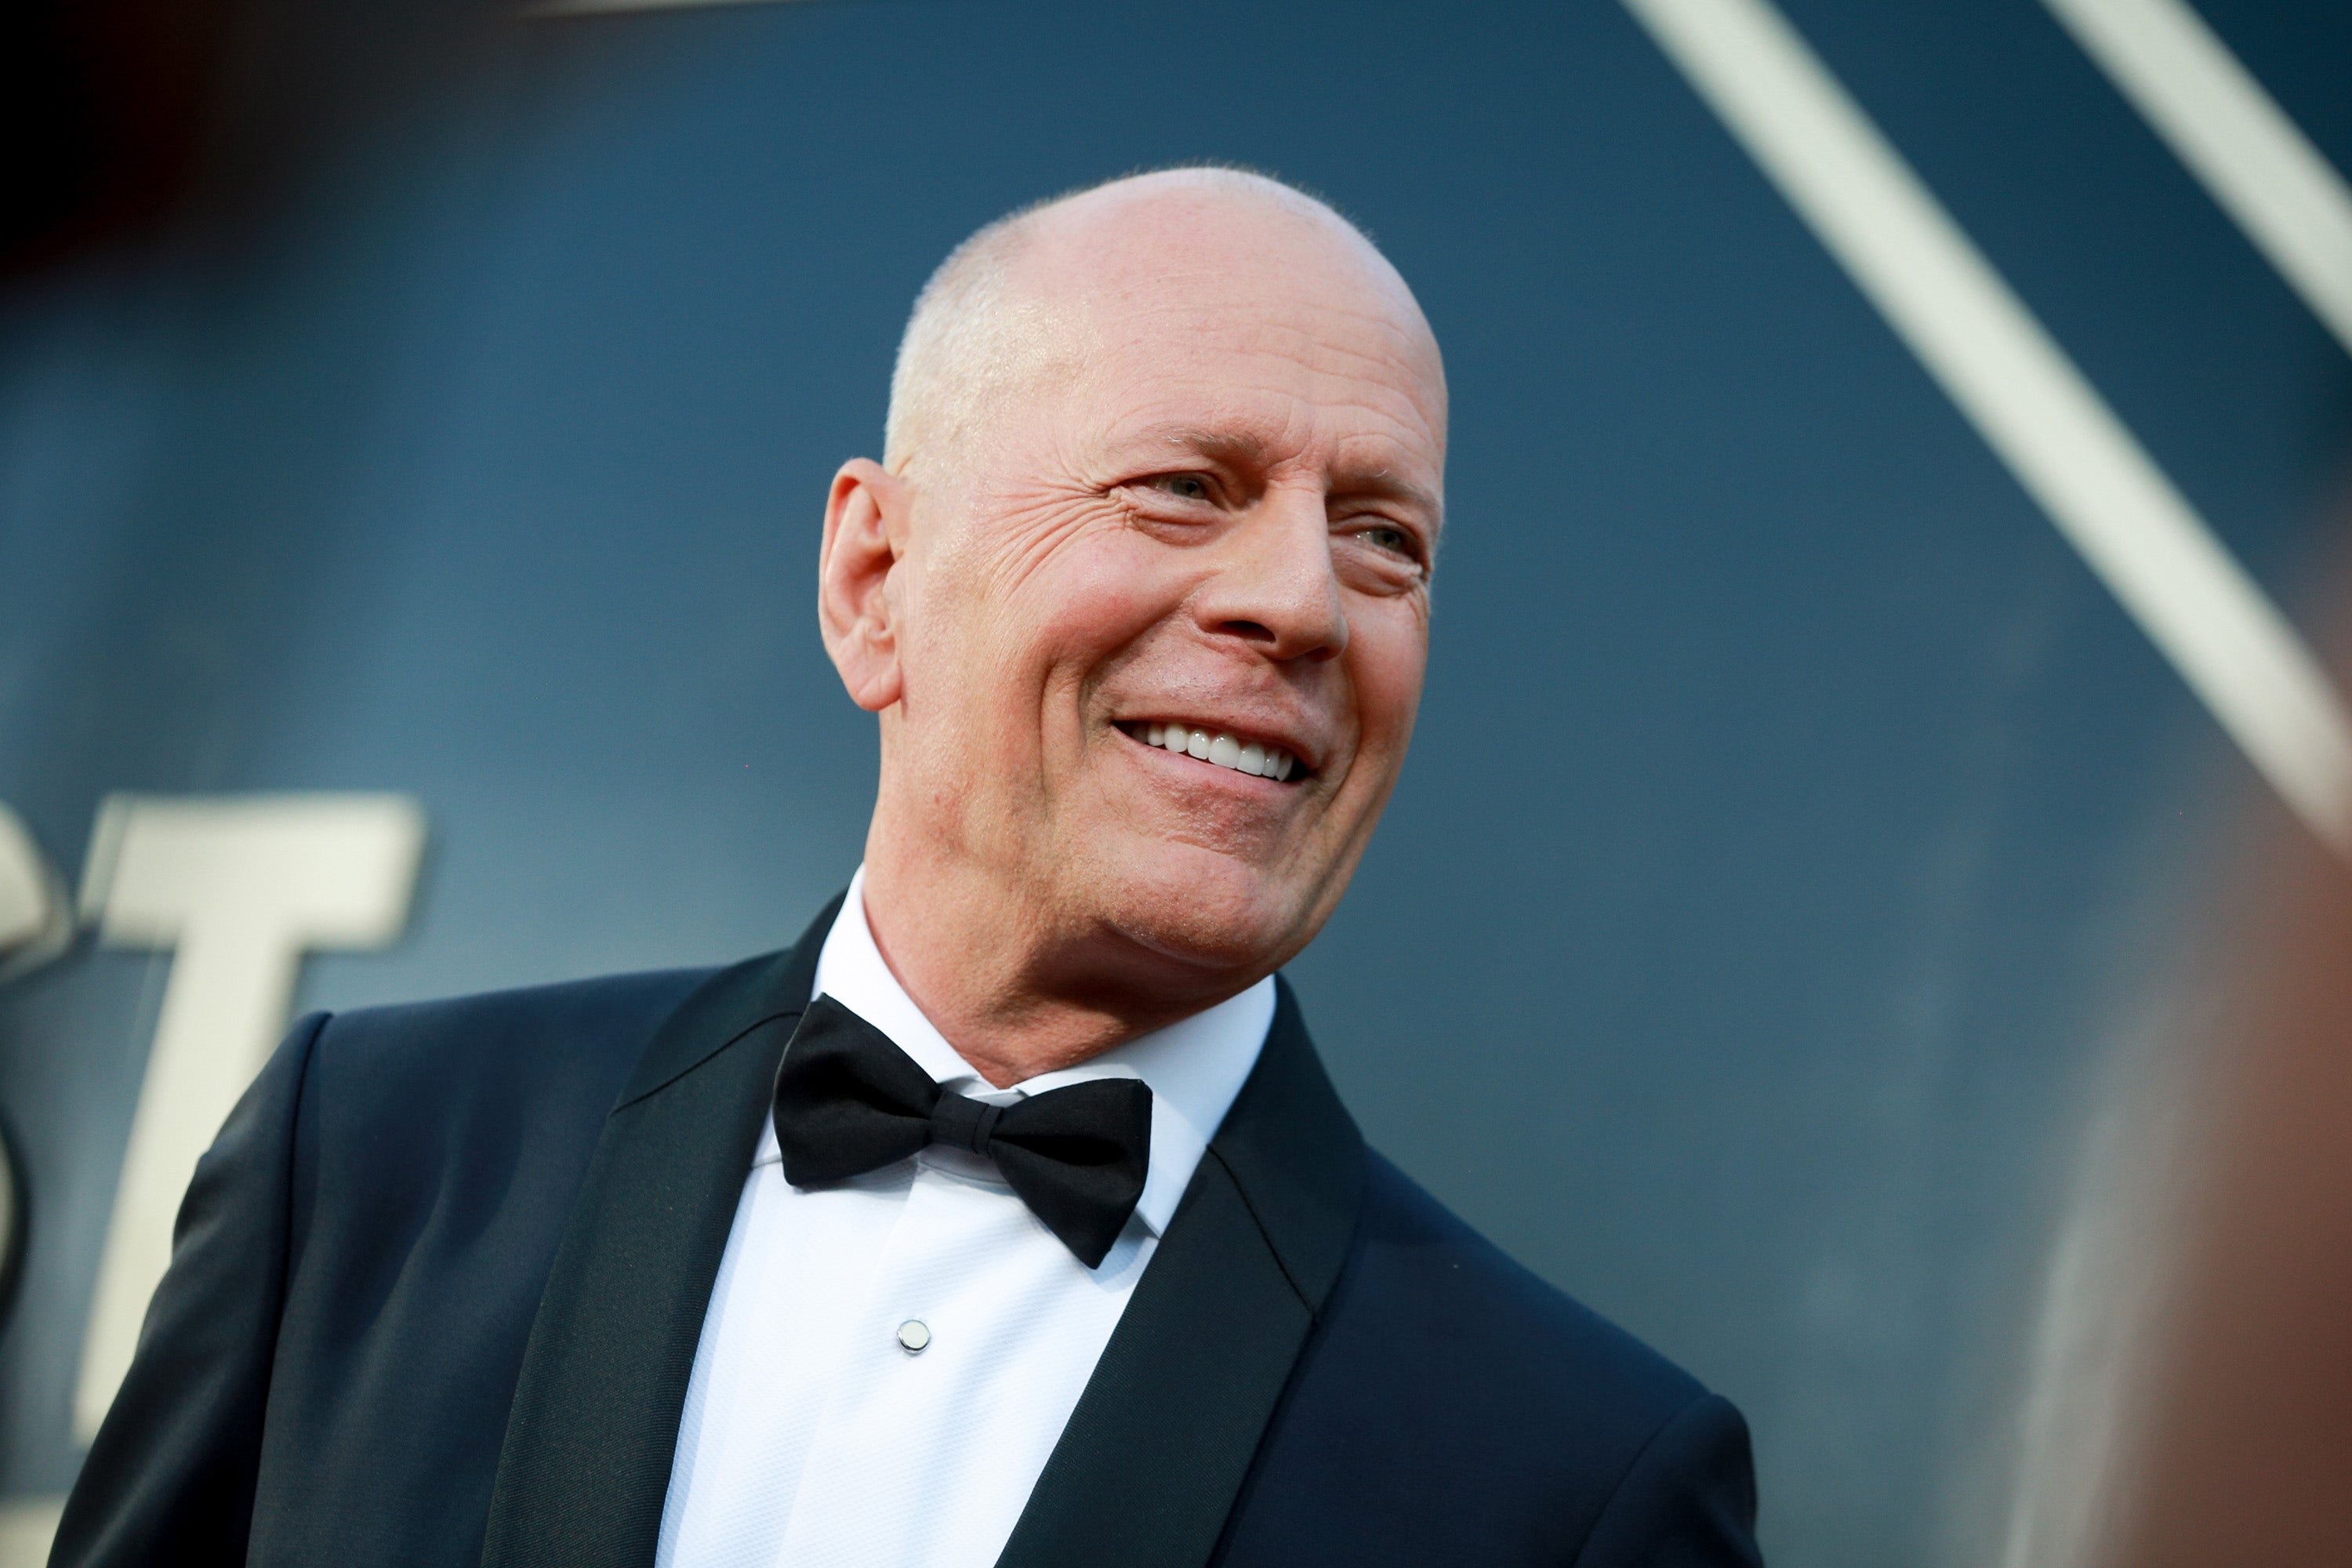 Etiquette expert says Bruce Willis' diagnosis reminds us what to say, not say when others are ill